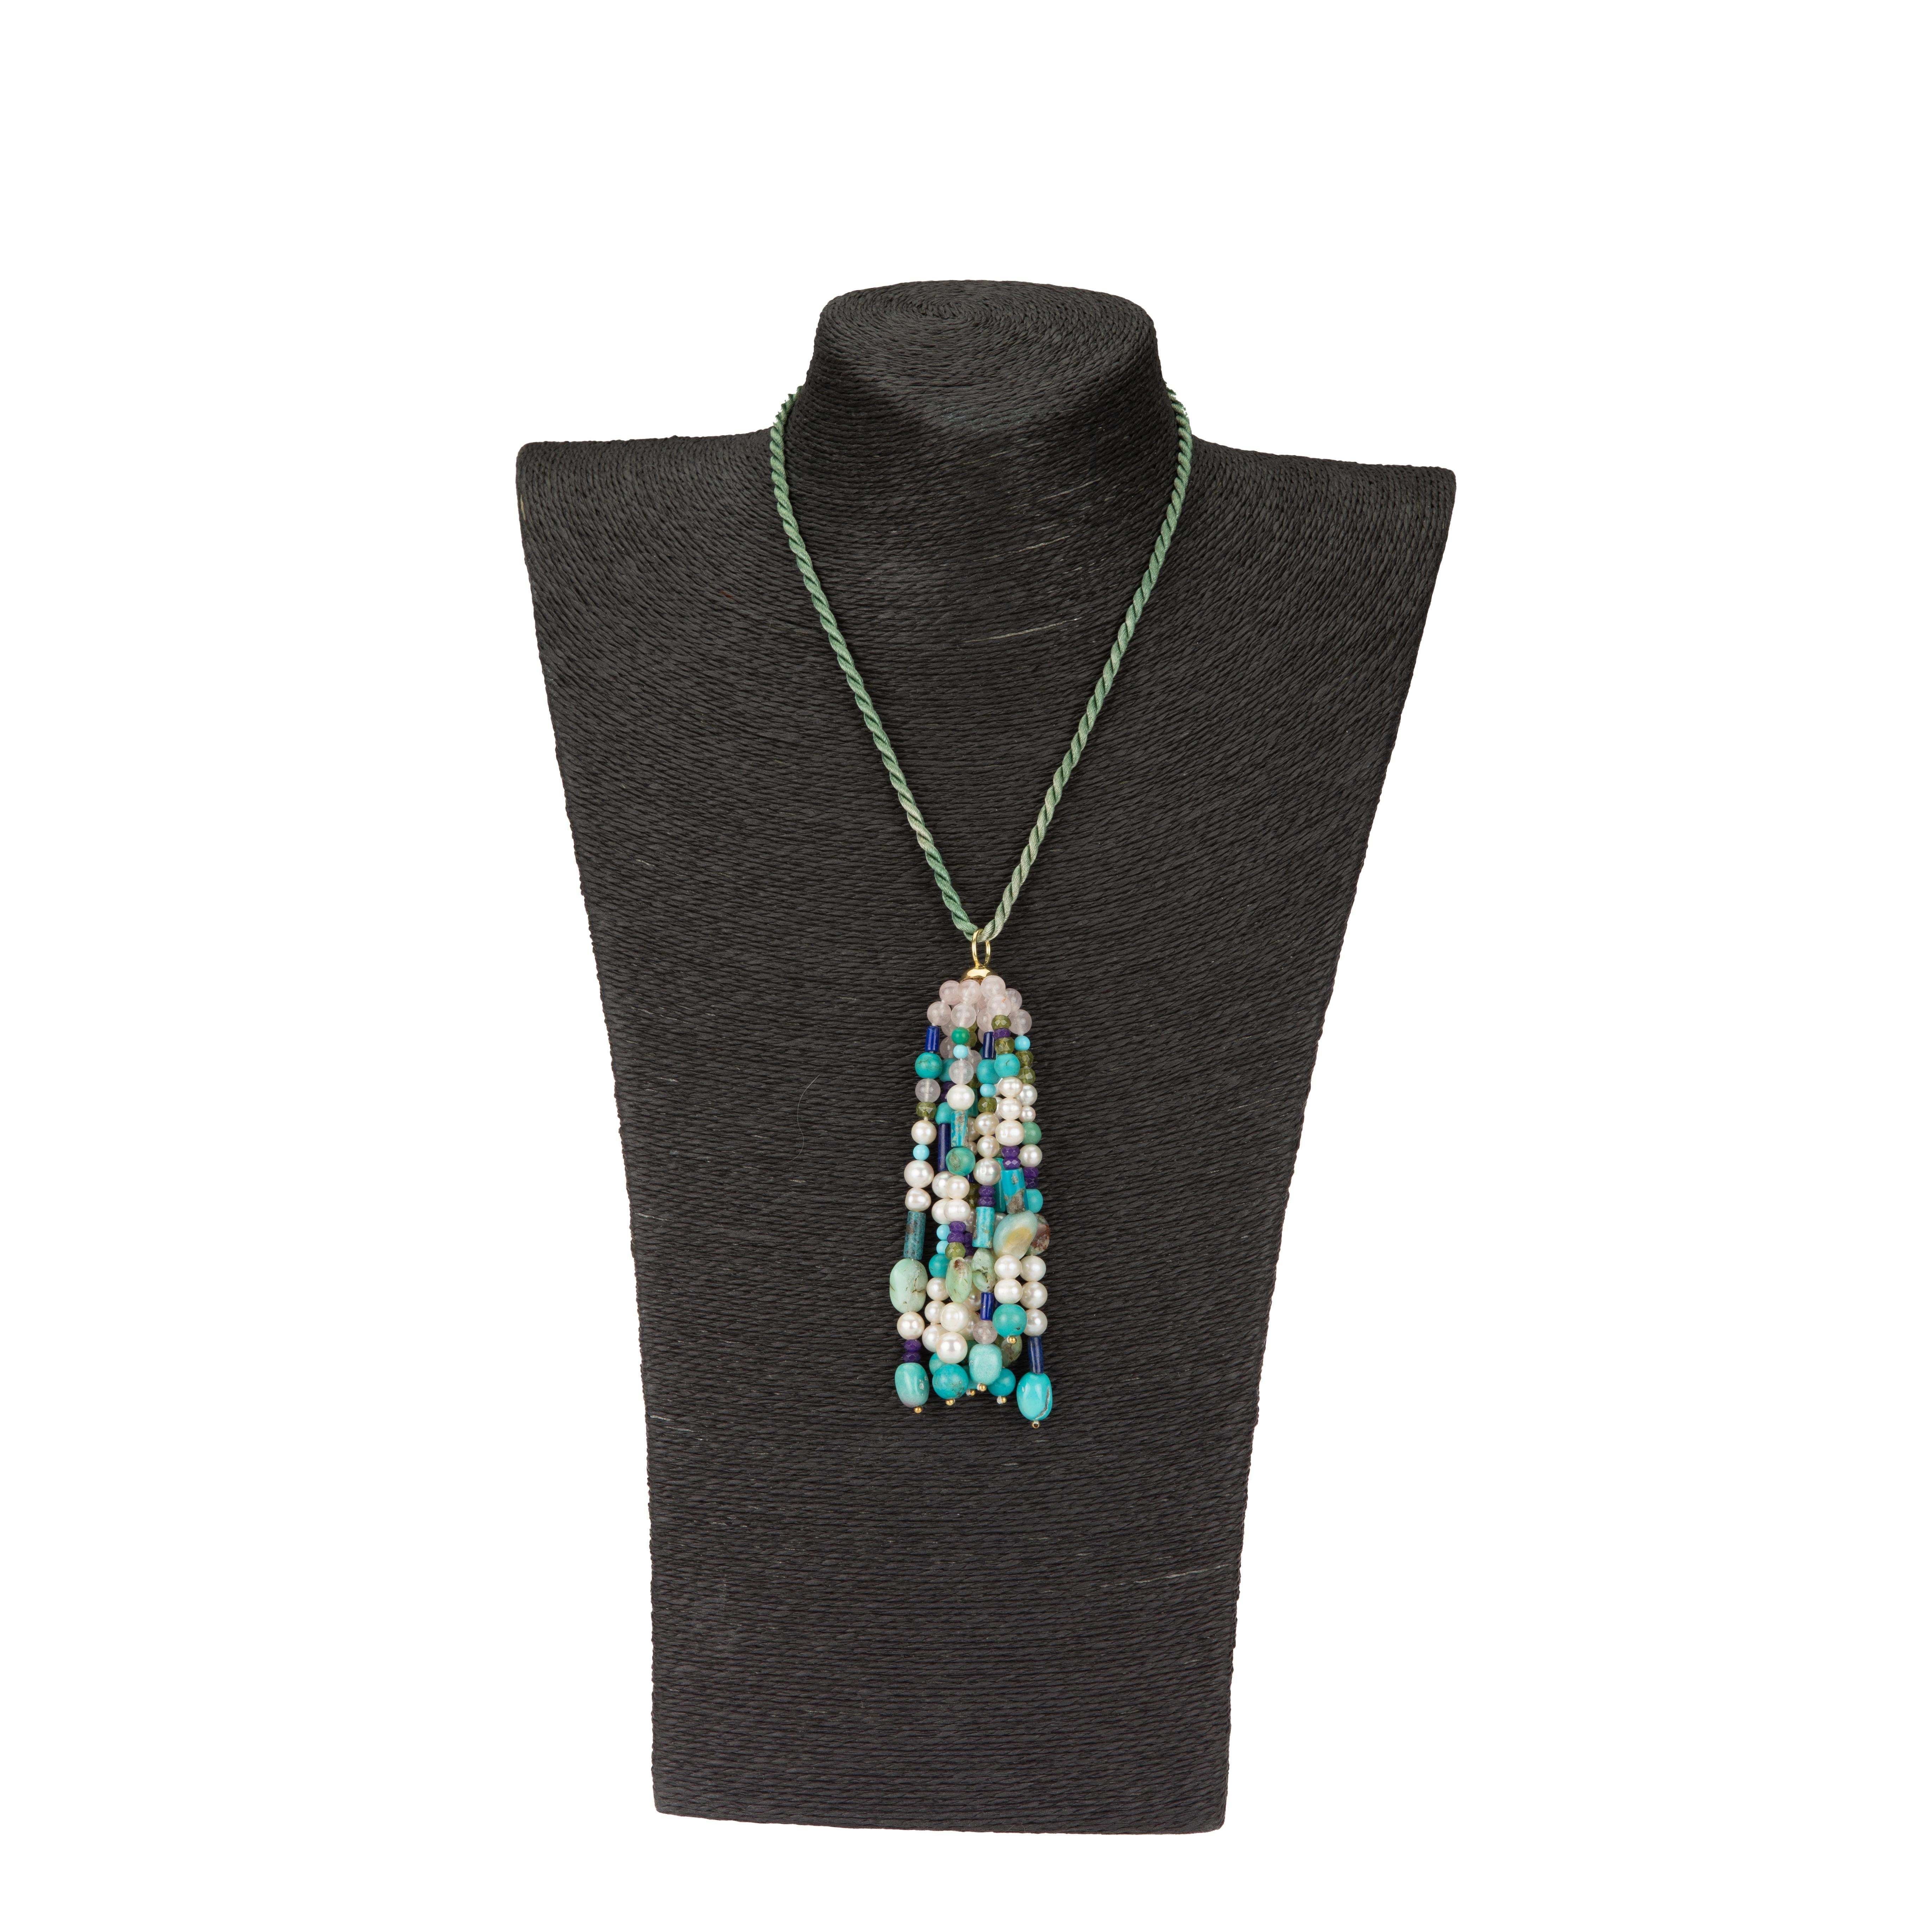 Fringe pendant mixed stone natural pearls, amazonite, lapis, turquoise,  faced vesuvianite Gold 18k gr.3,40.
We deliver the pieces with nice silk string, but you can order gold necklace upon request.
All Giulia Colussi jewelry is new and has never